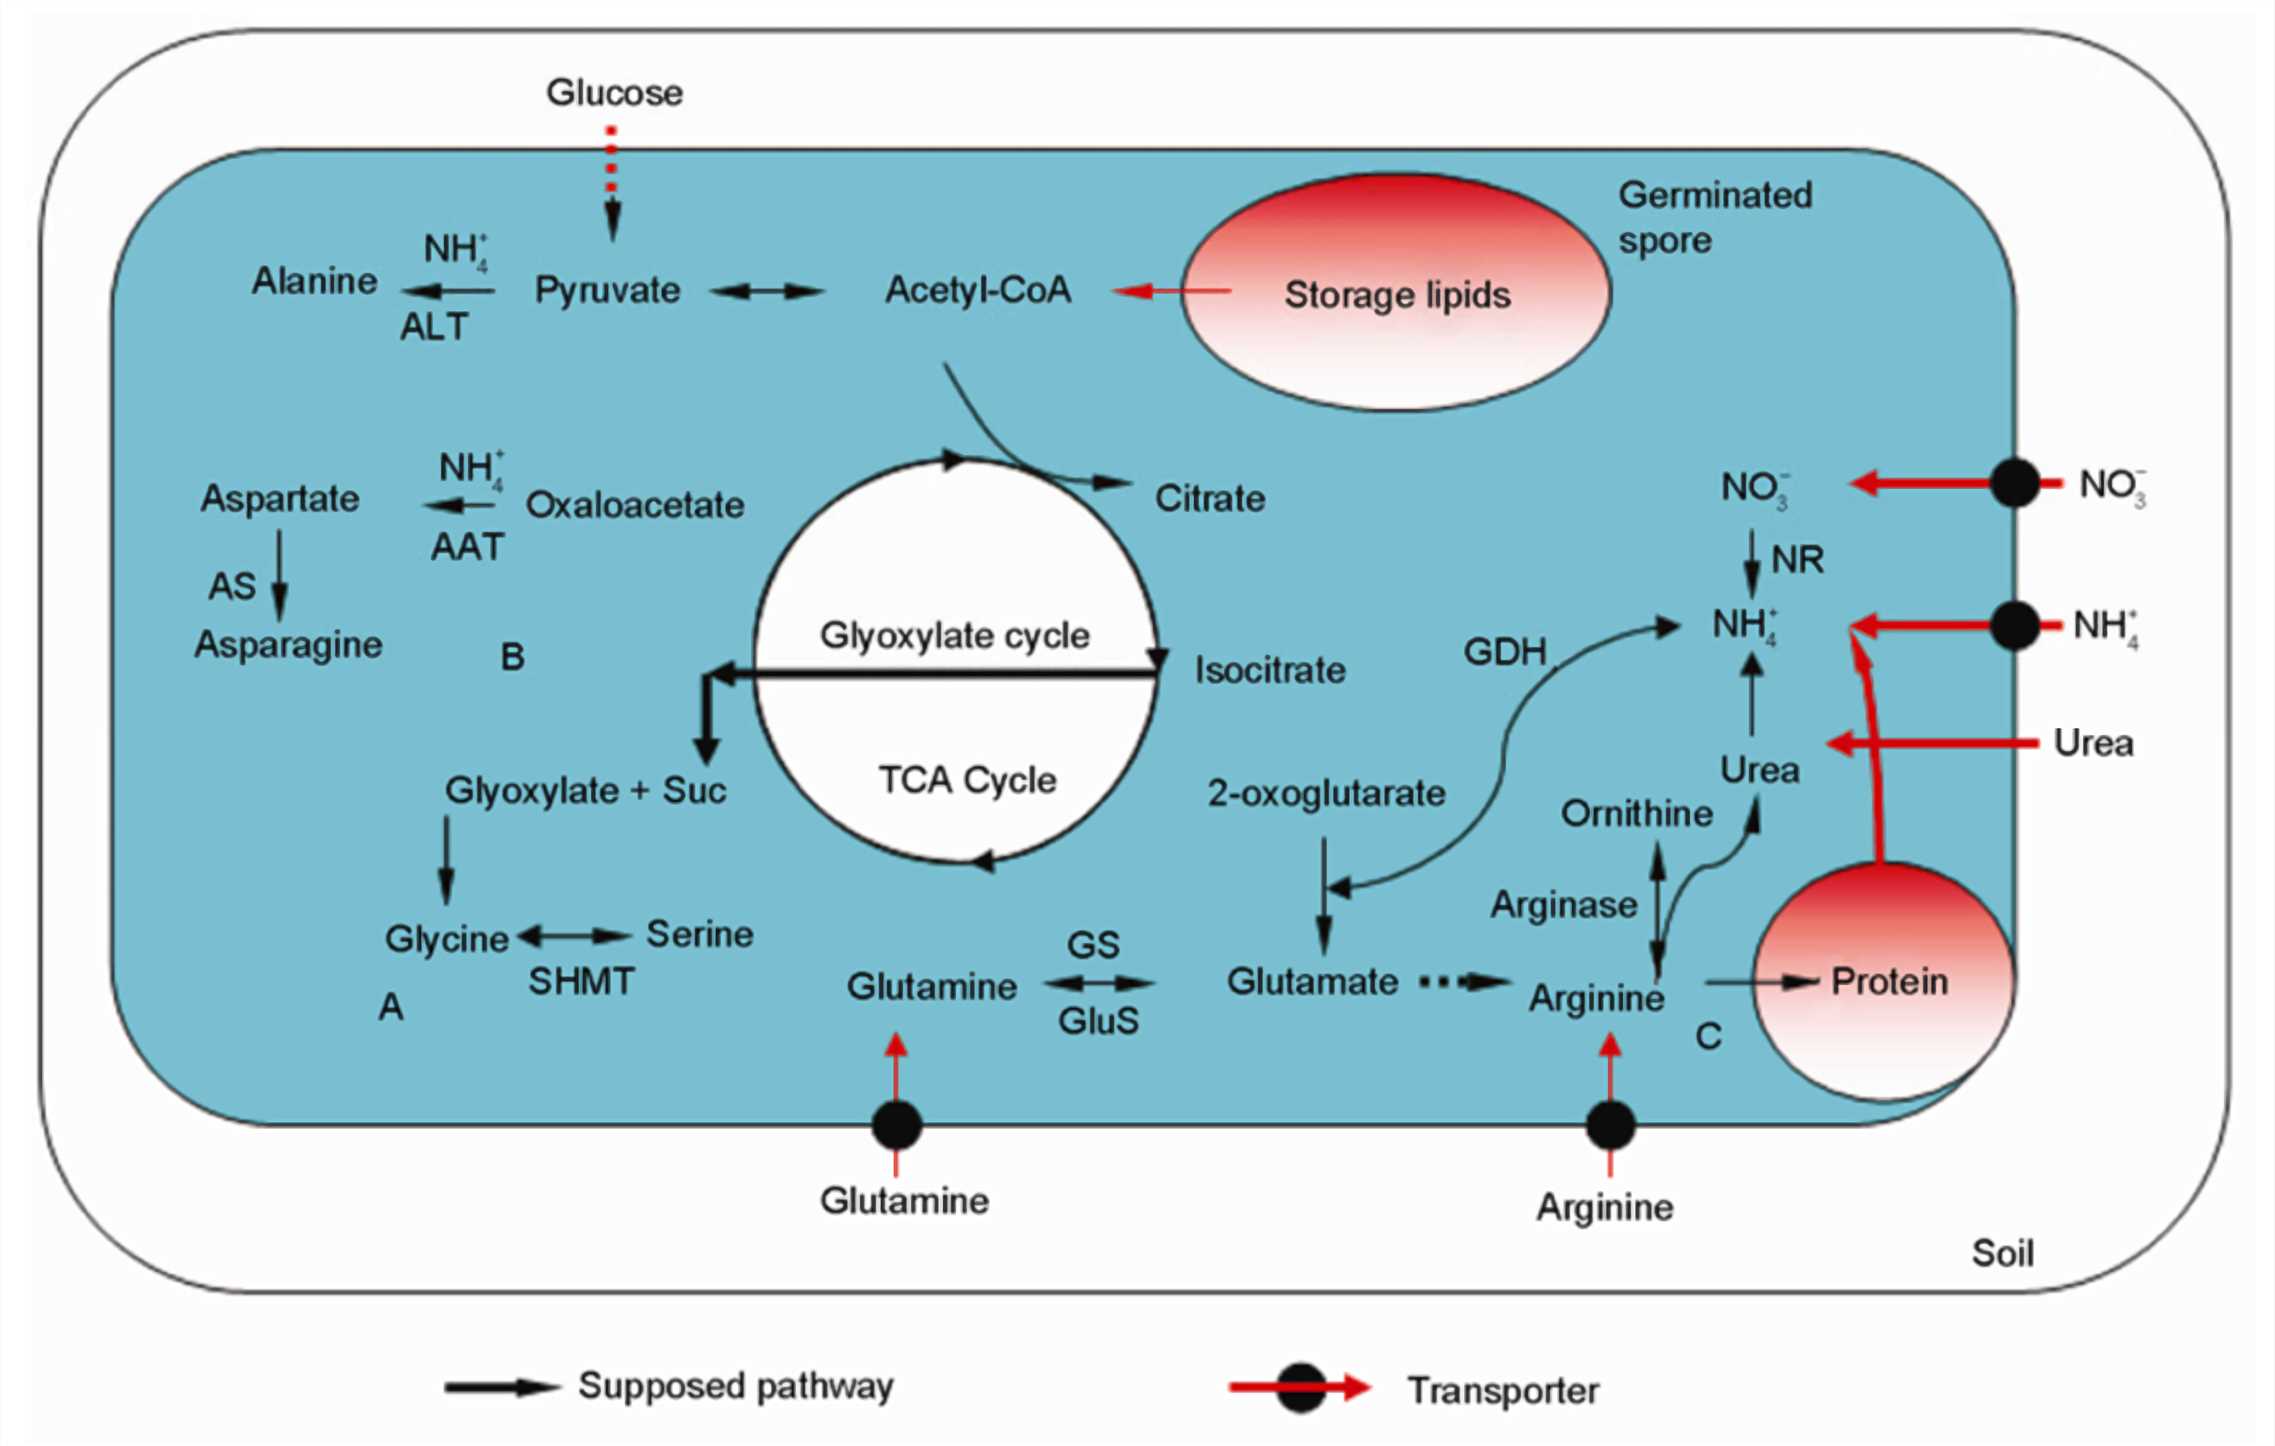 A model of the major metabolic pathway for nitrogen (N) and carbon (C) in germinating spores of arbuscular mycorrhizal (AM) fungi G. intraradices.